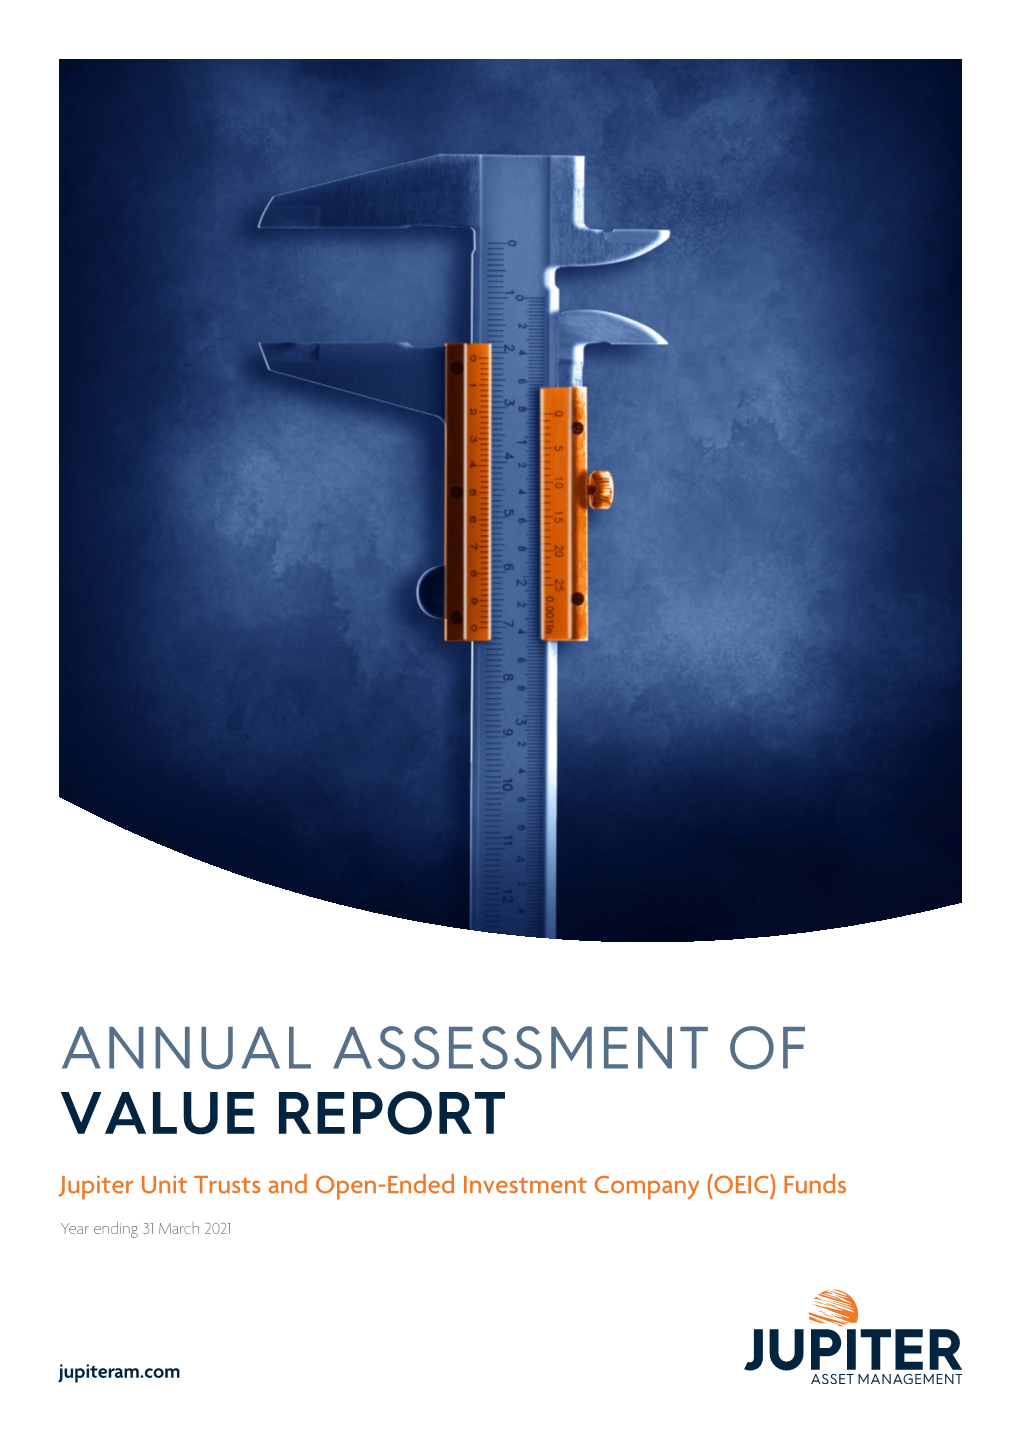 Annual Assessment of Value Report